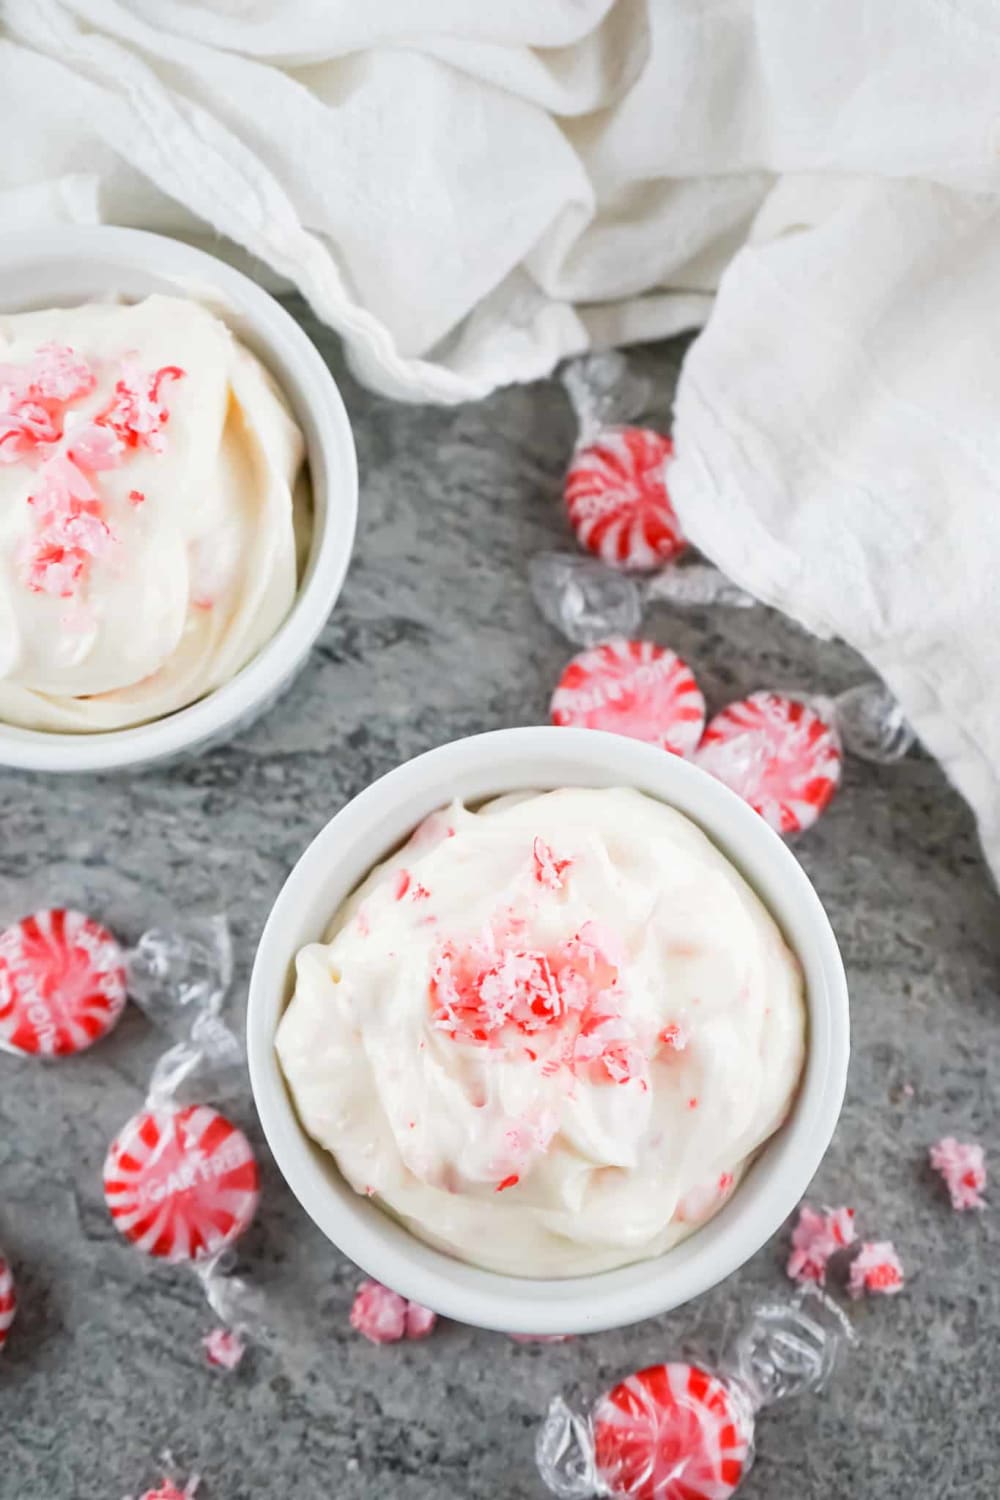 Celebrate the Holidays with Keto Peppermint Dip